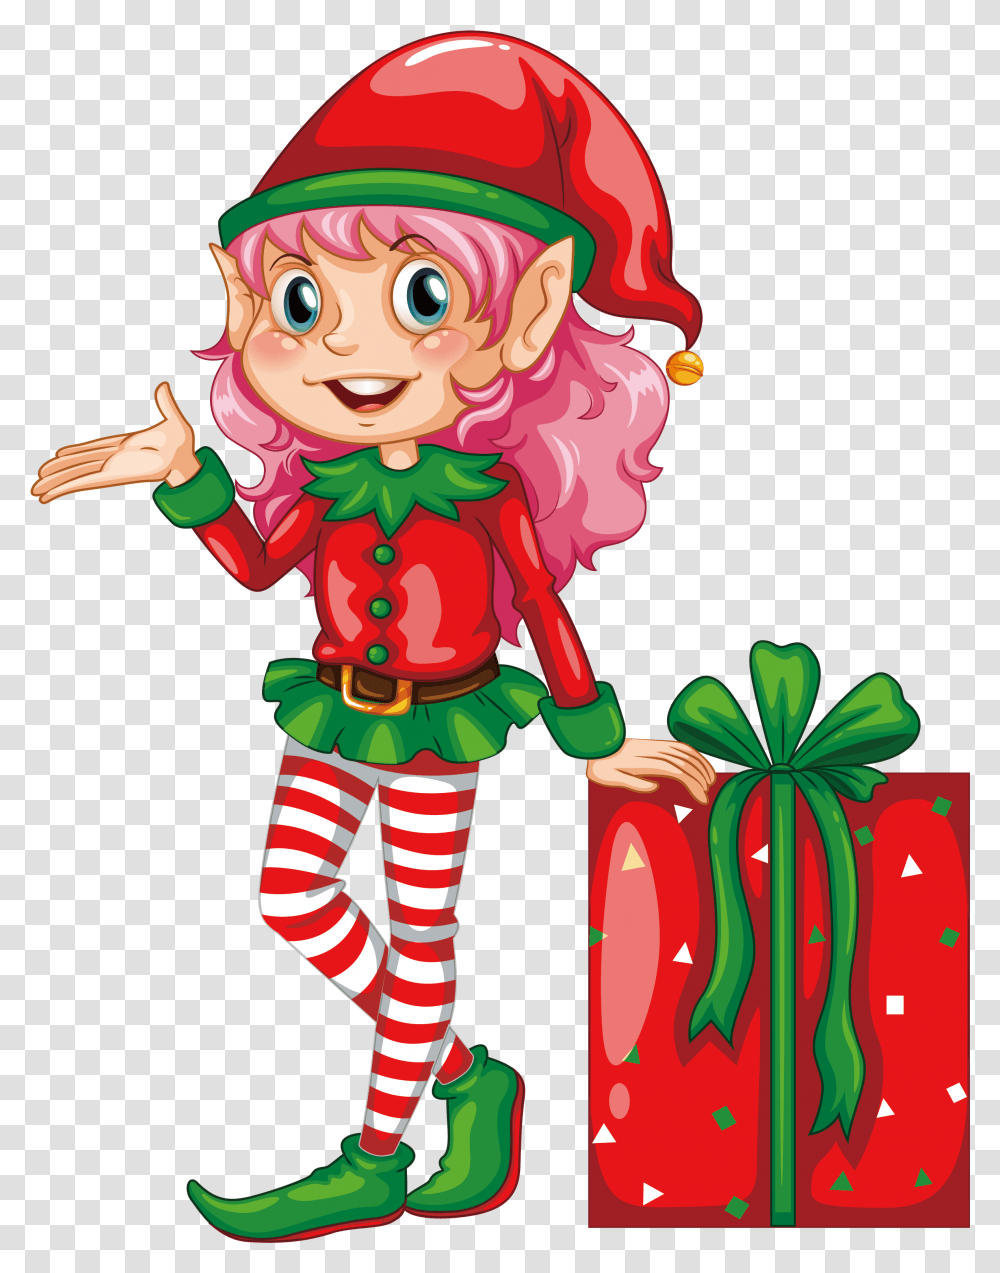 Igloo Elf Drawing Illustration A Red Dress Elf Free Christmas Images Elf, Person, Human, Performer, Graphics Transparent Png